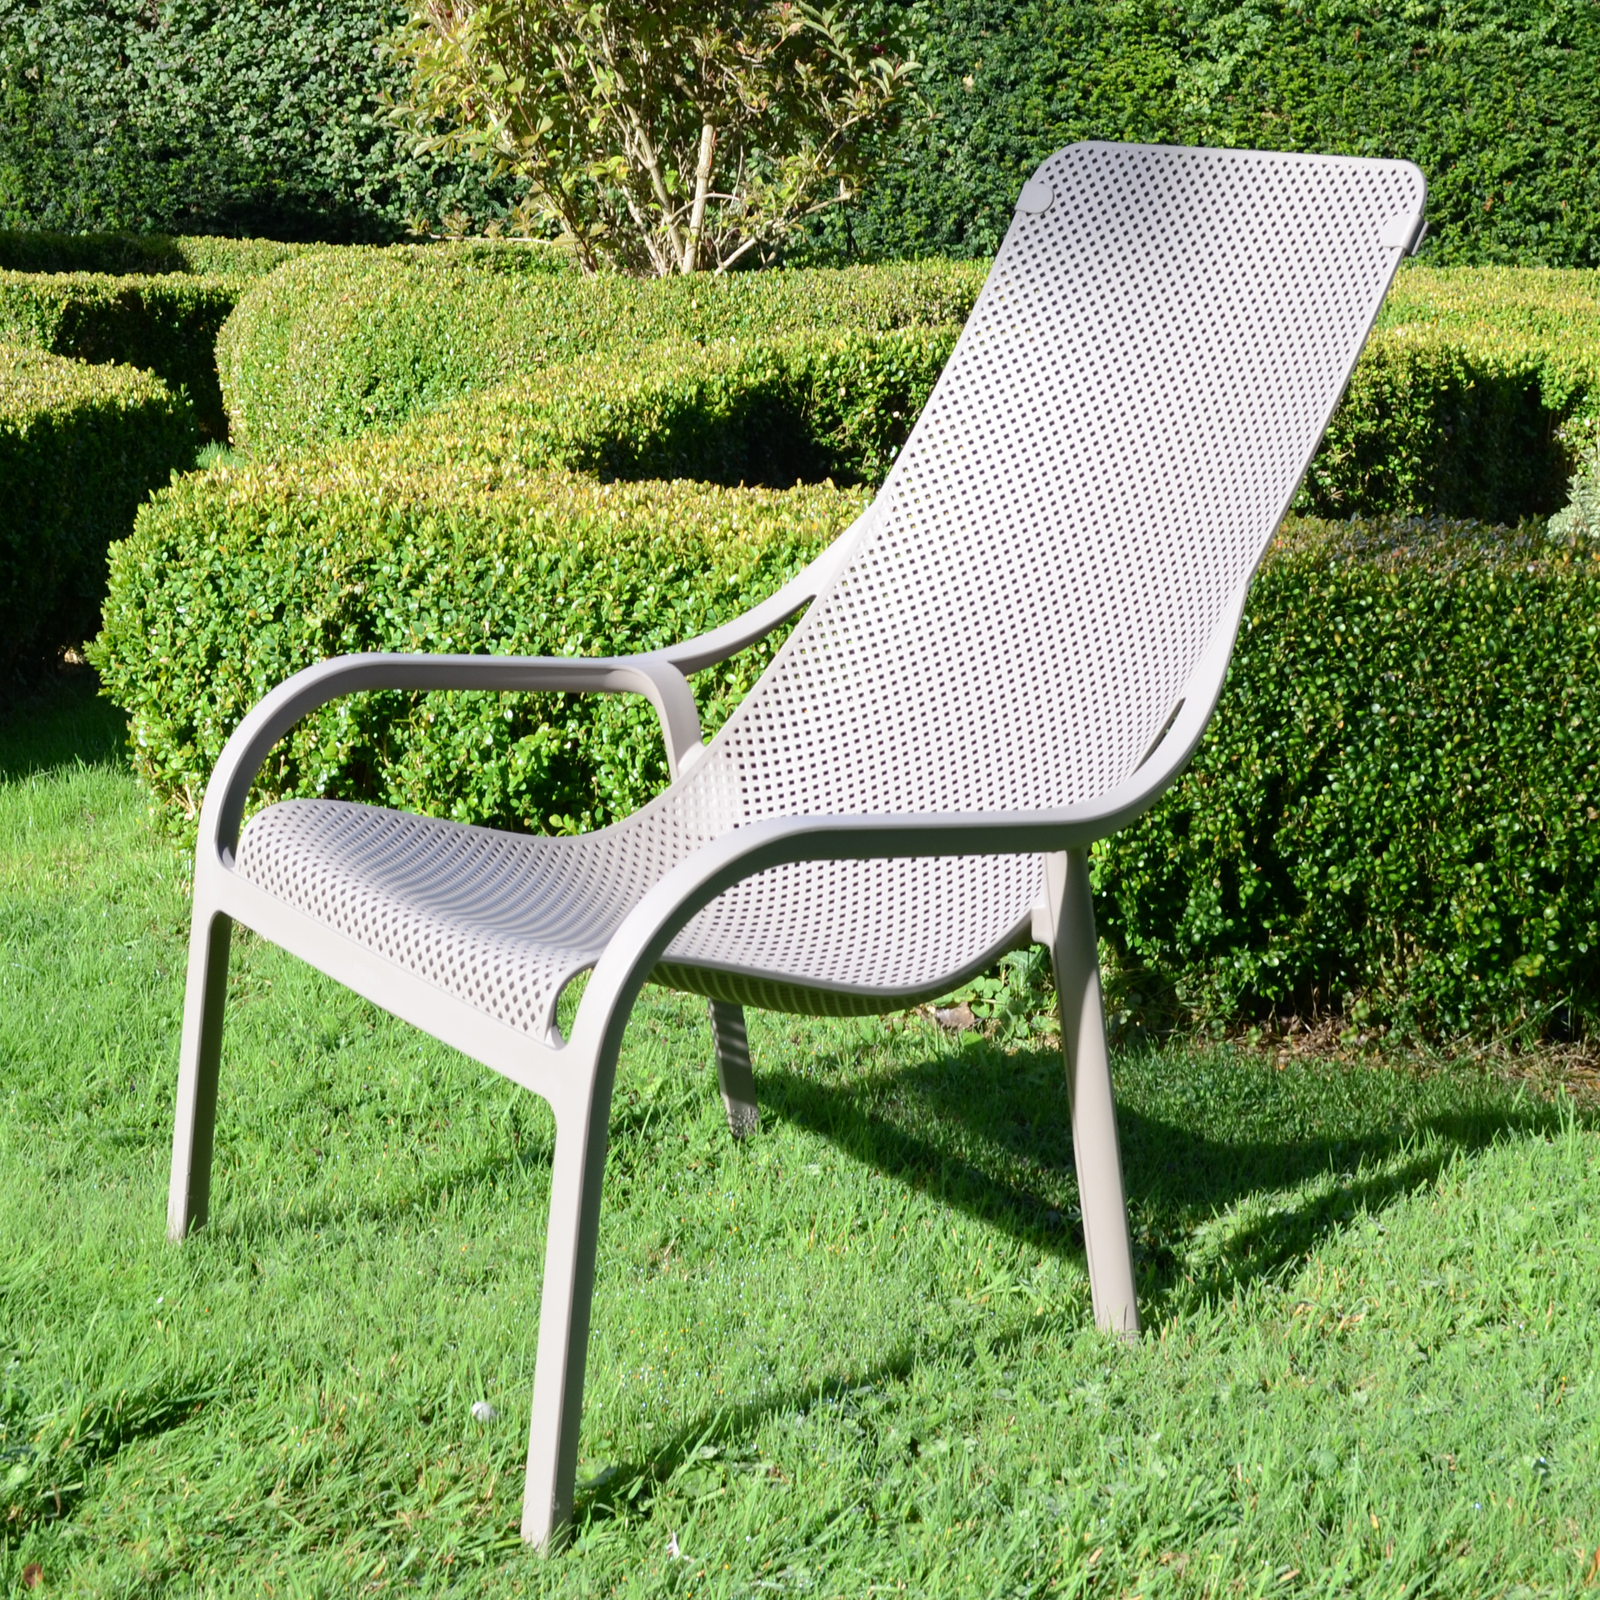 Nardi Net Lounge Garden Chair in Turtle Dove Grey (Pack of 2) Chairs Nardi Default Title  